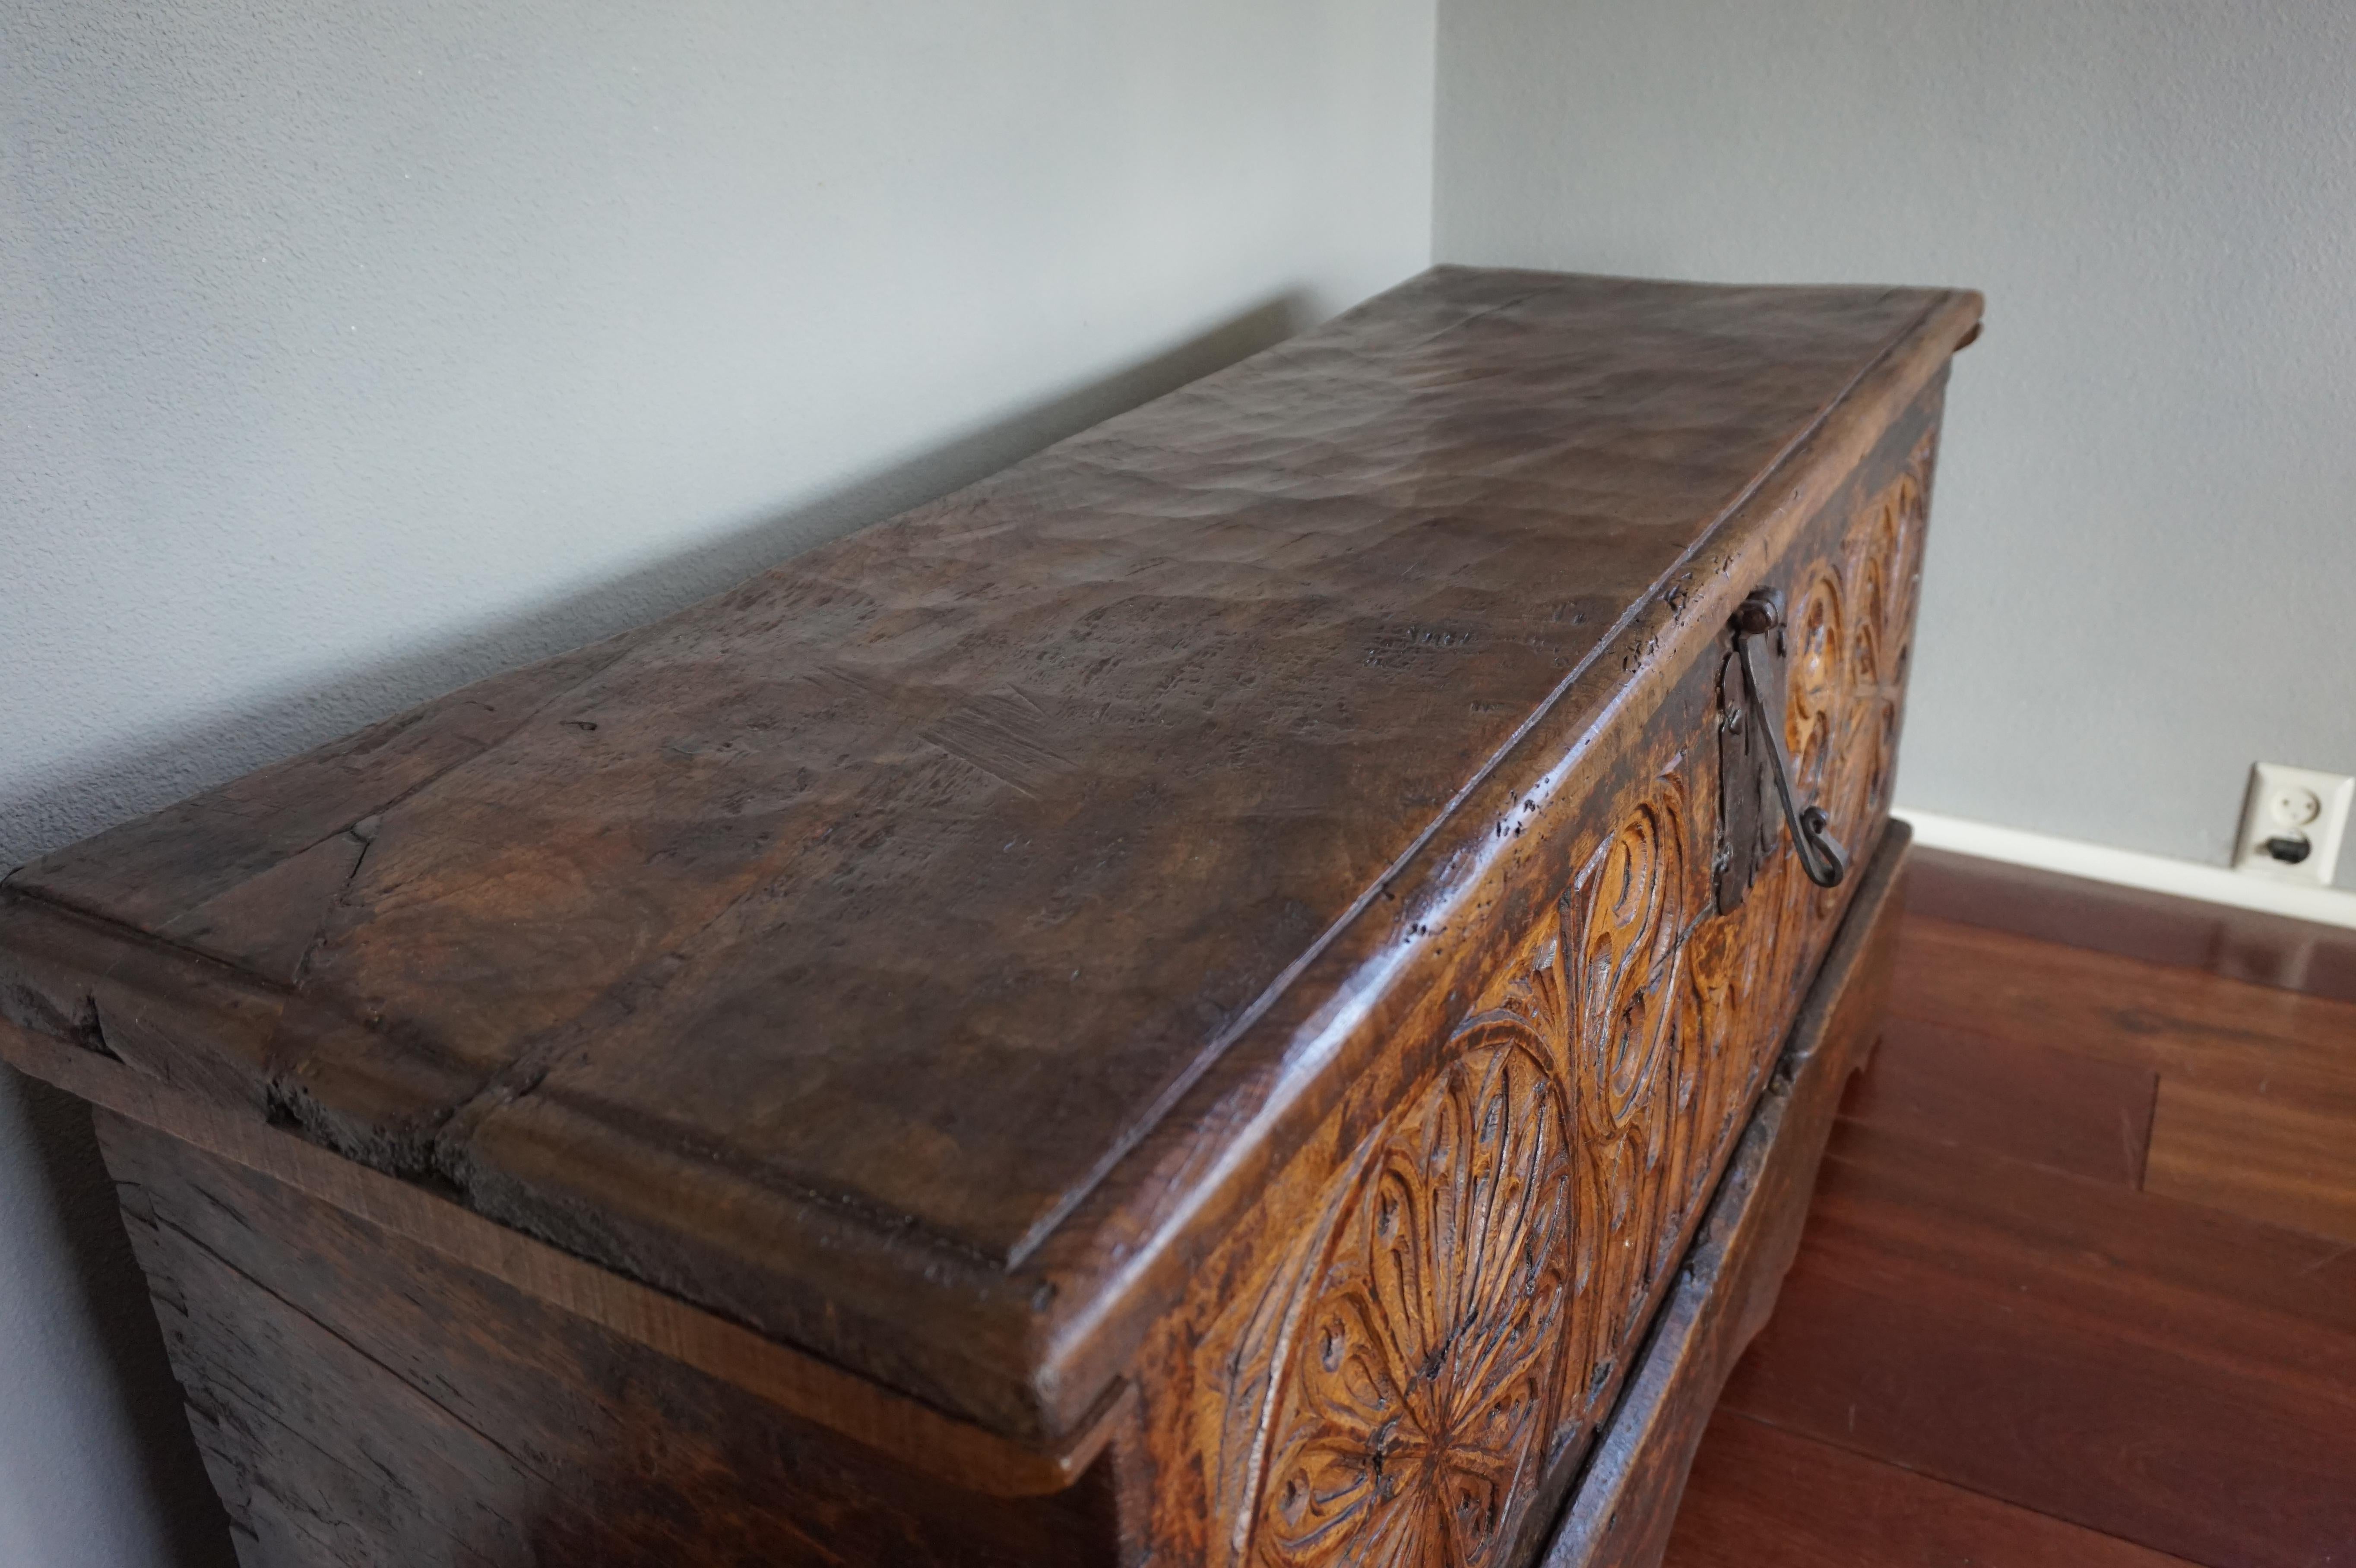 Antique Gothic Revival Blanket Chest / Trunk with an Amazing Patina 1680 - 1720 6